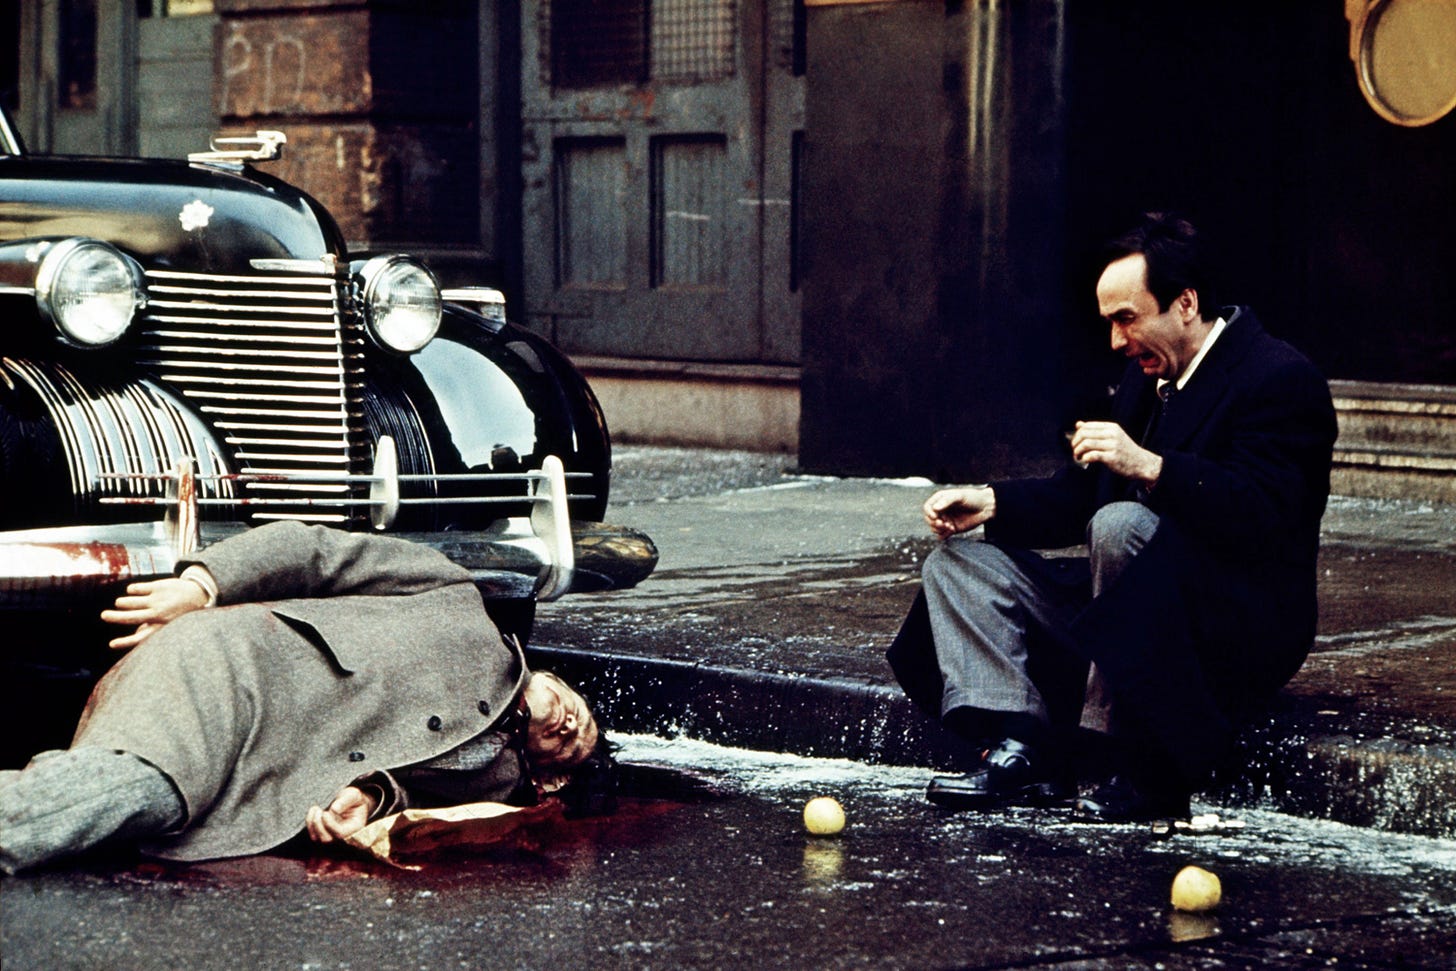 Oranges Roll By a Fallen Vito Corleone in The Godfather